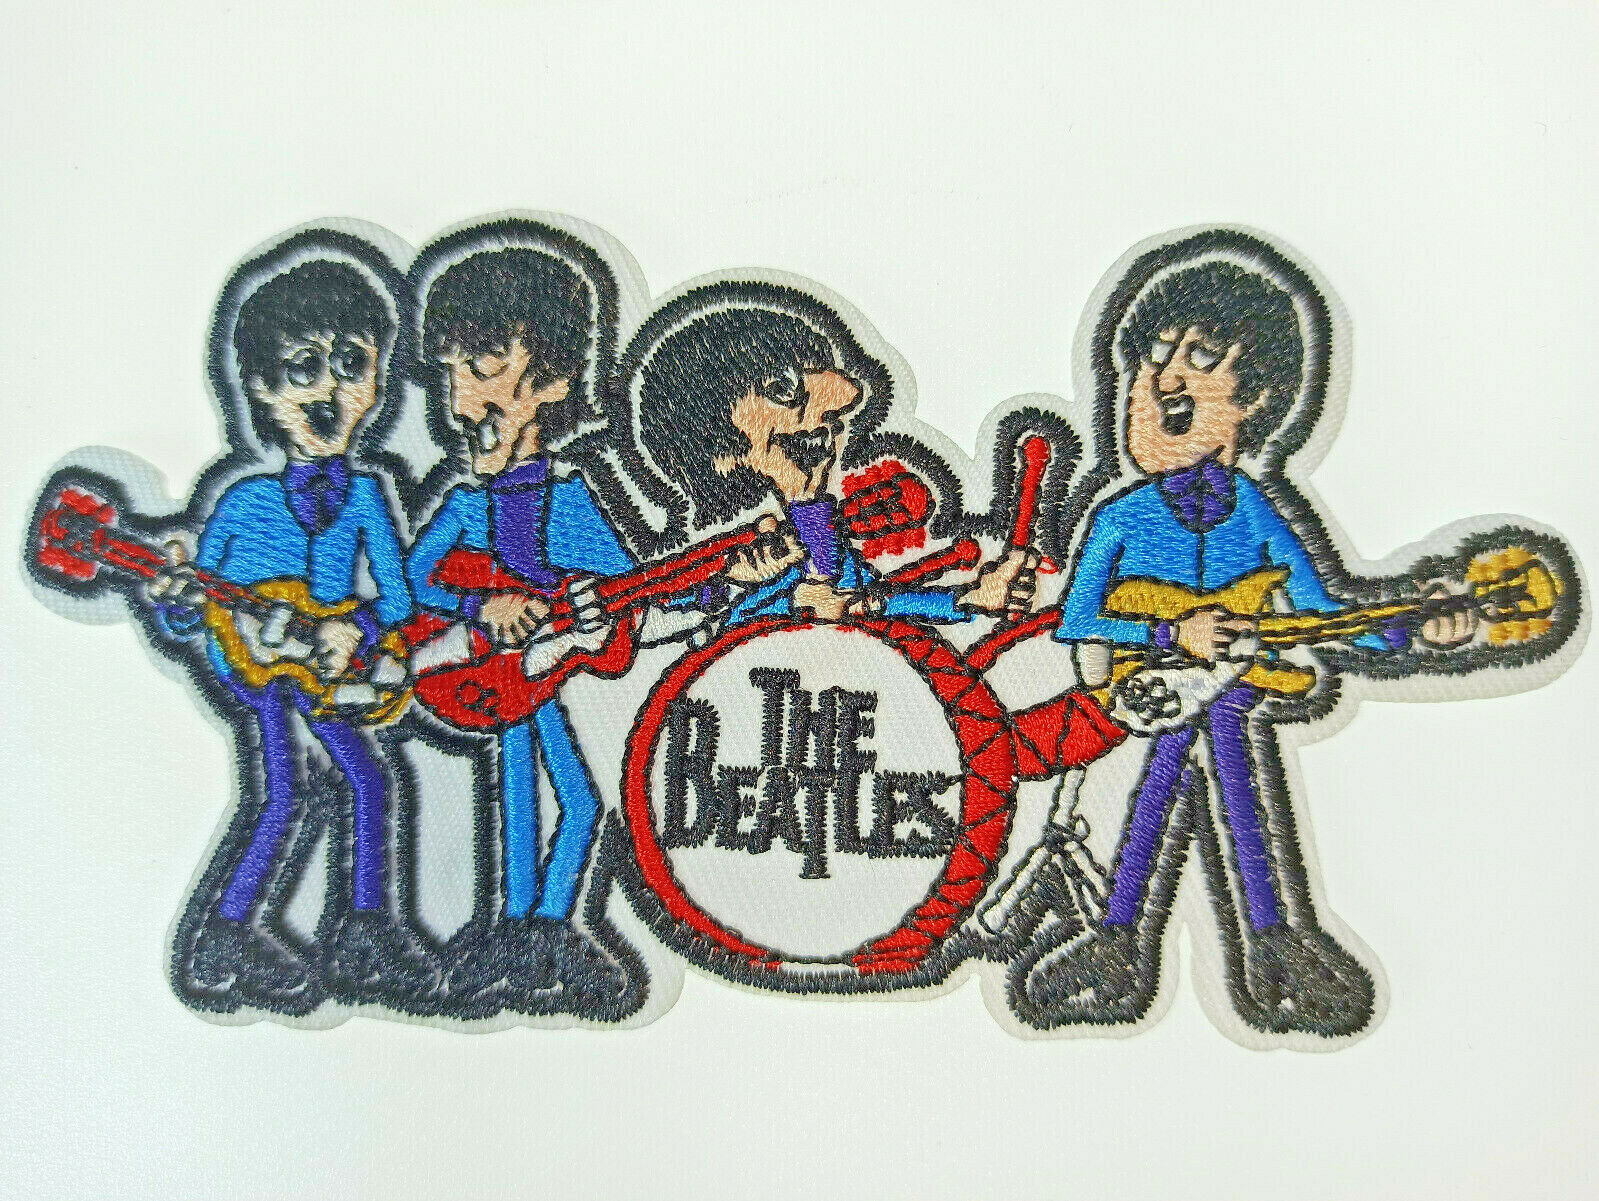 The Beatles Band Embroidered Cloth Patch Badge Iron Sew On Applique 5x2.5" New